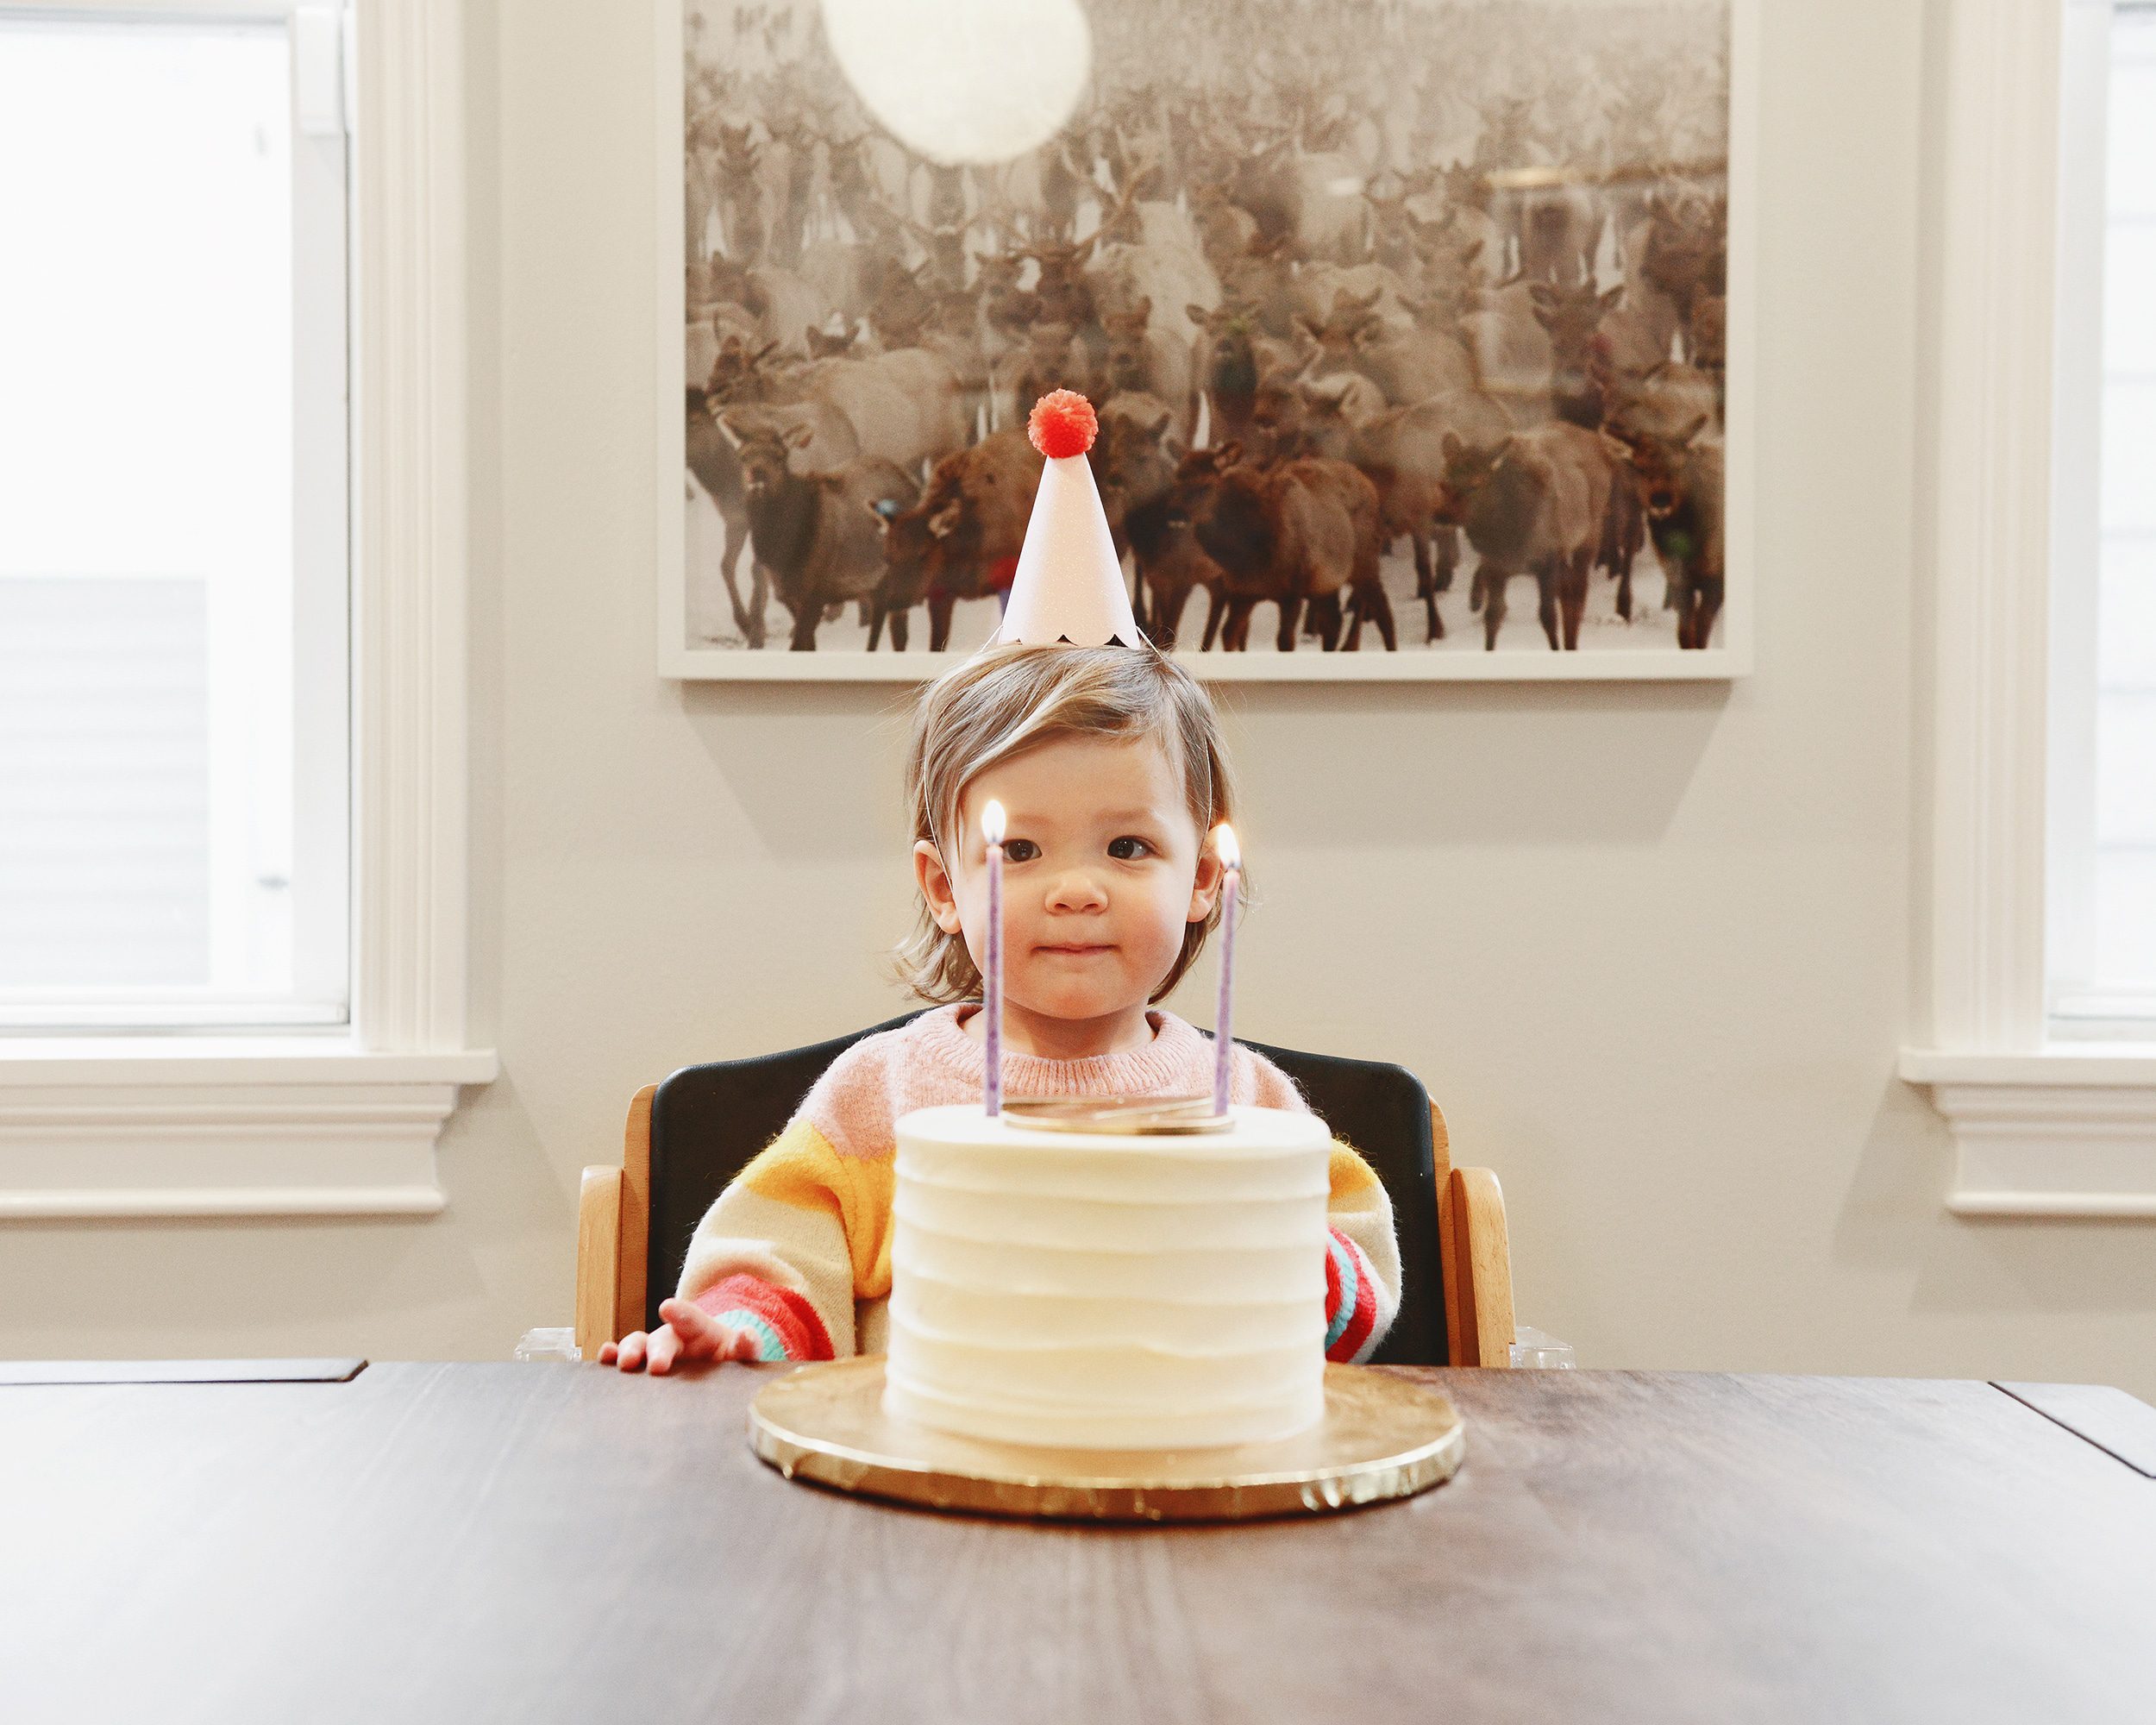 Lucy is 2! Our sweet girl with a simple birthday cake and 2 candles | via Yellow Brick Home